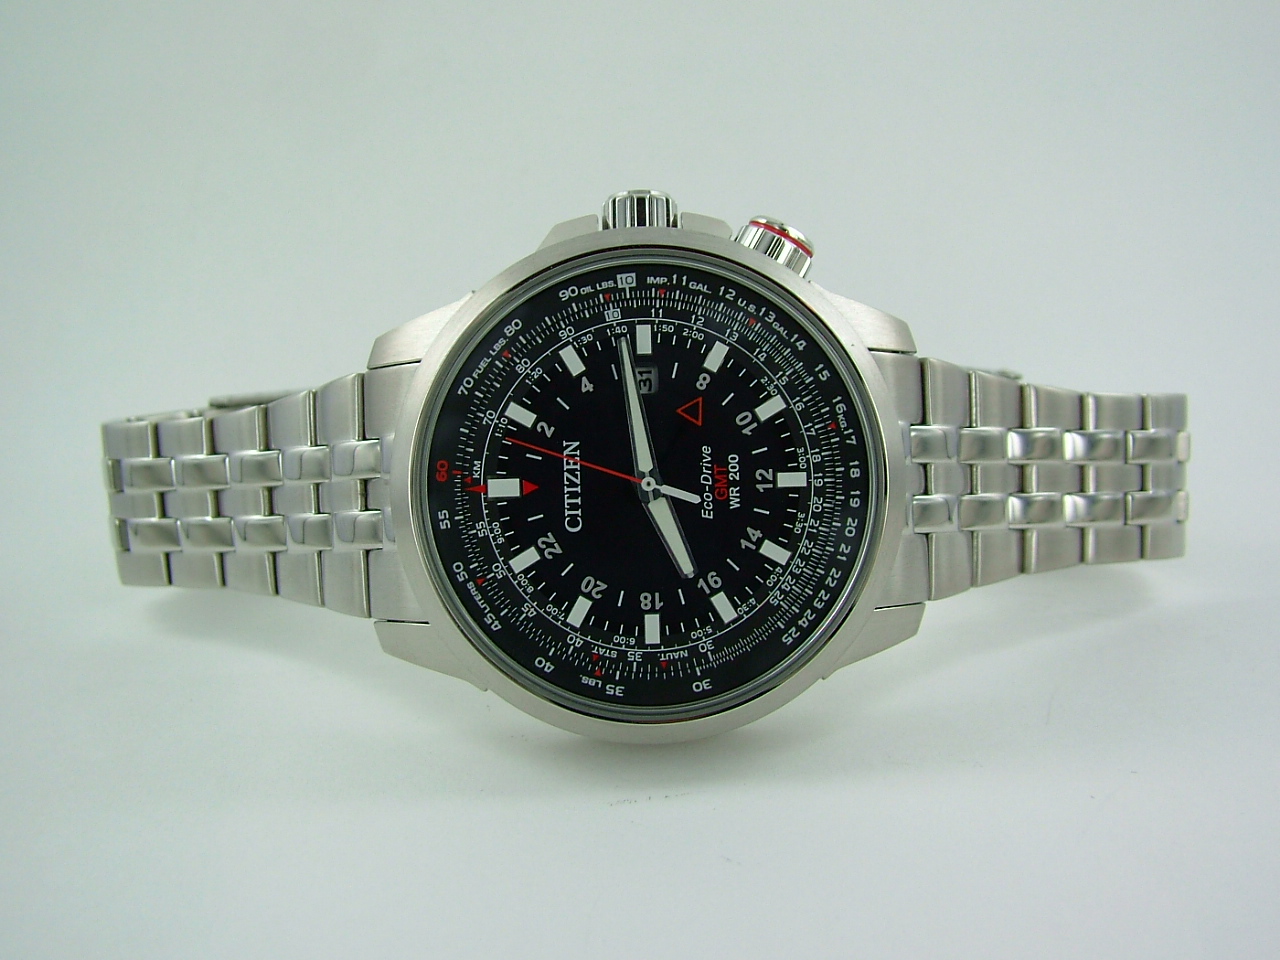 CITIZEN GN-4W-S Eco-drive GMT Chronograph – Clockwise